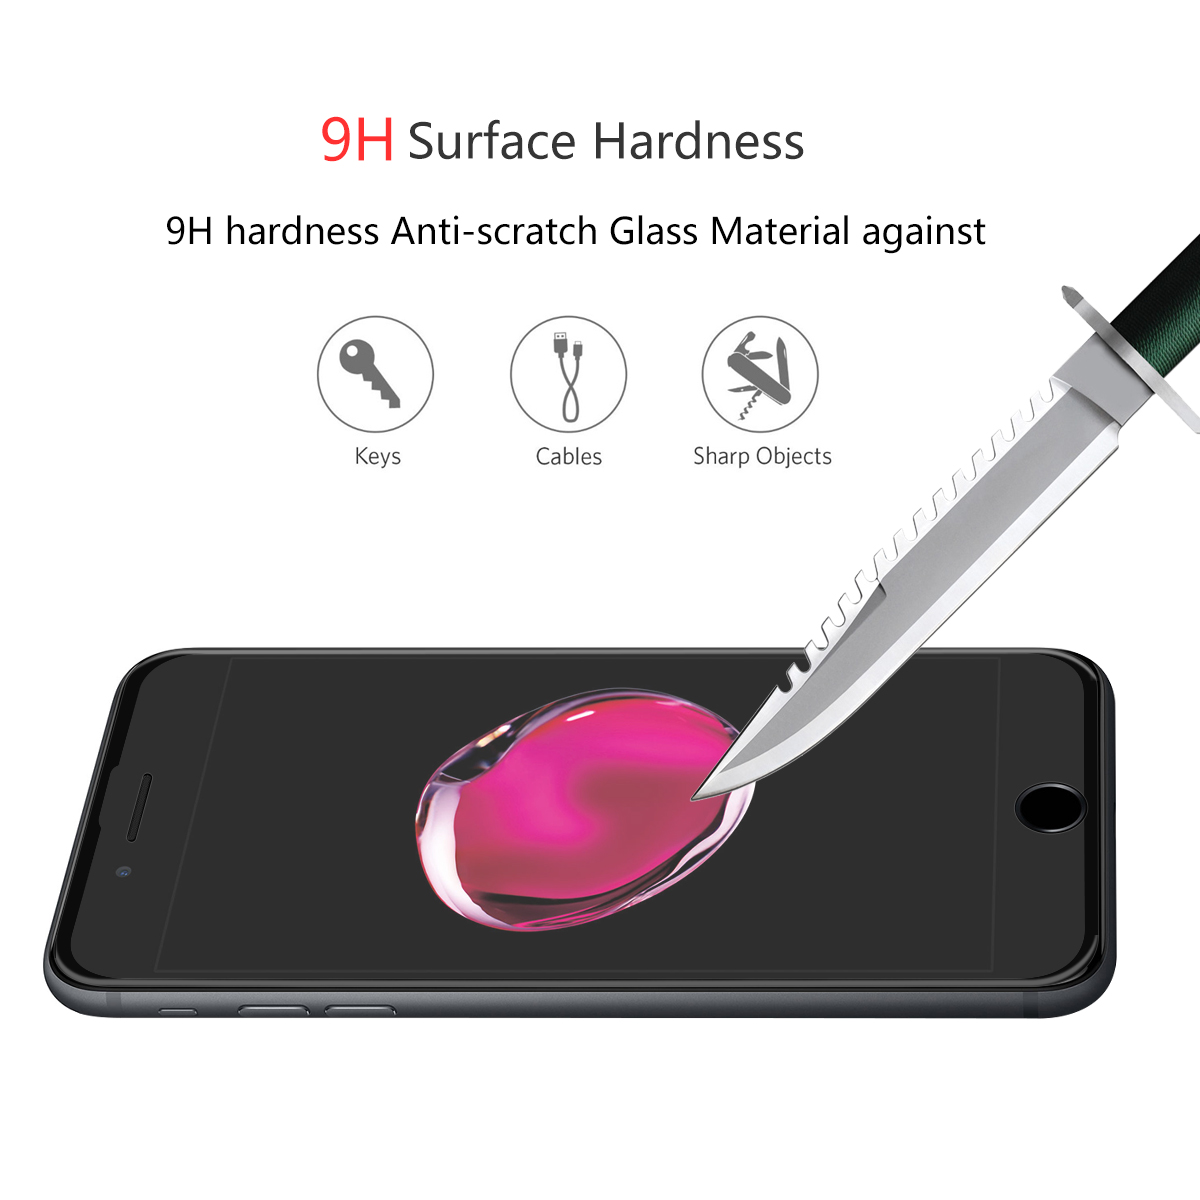 Enkay-02mm-6D-Curved-Edge-Soft-TPU-Tempered-Glass-Screen-Protector-For-iPhone-7-PlusiPhone-8-Plus-1335387-3